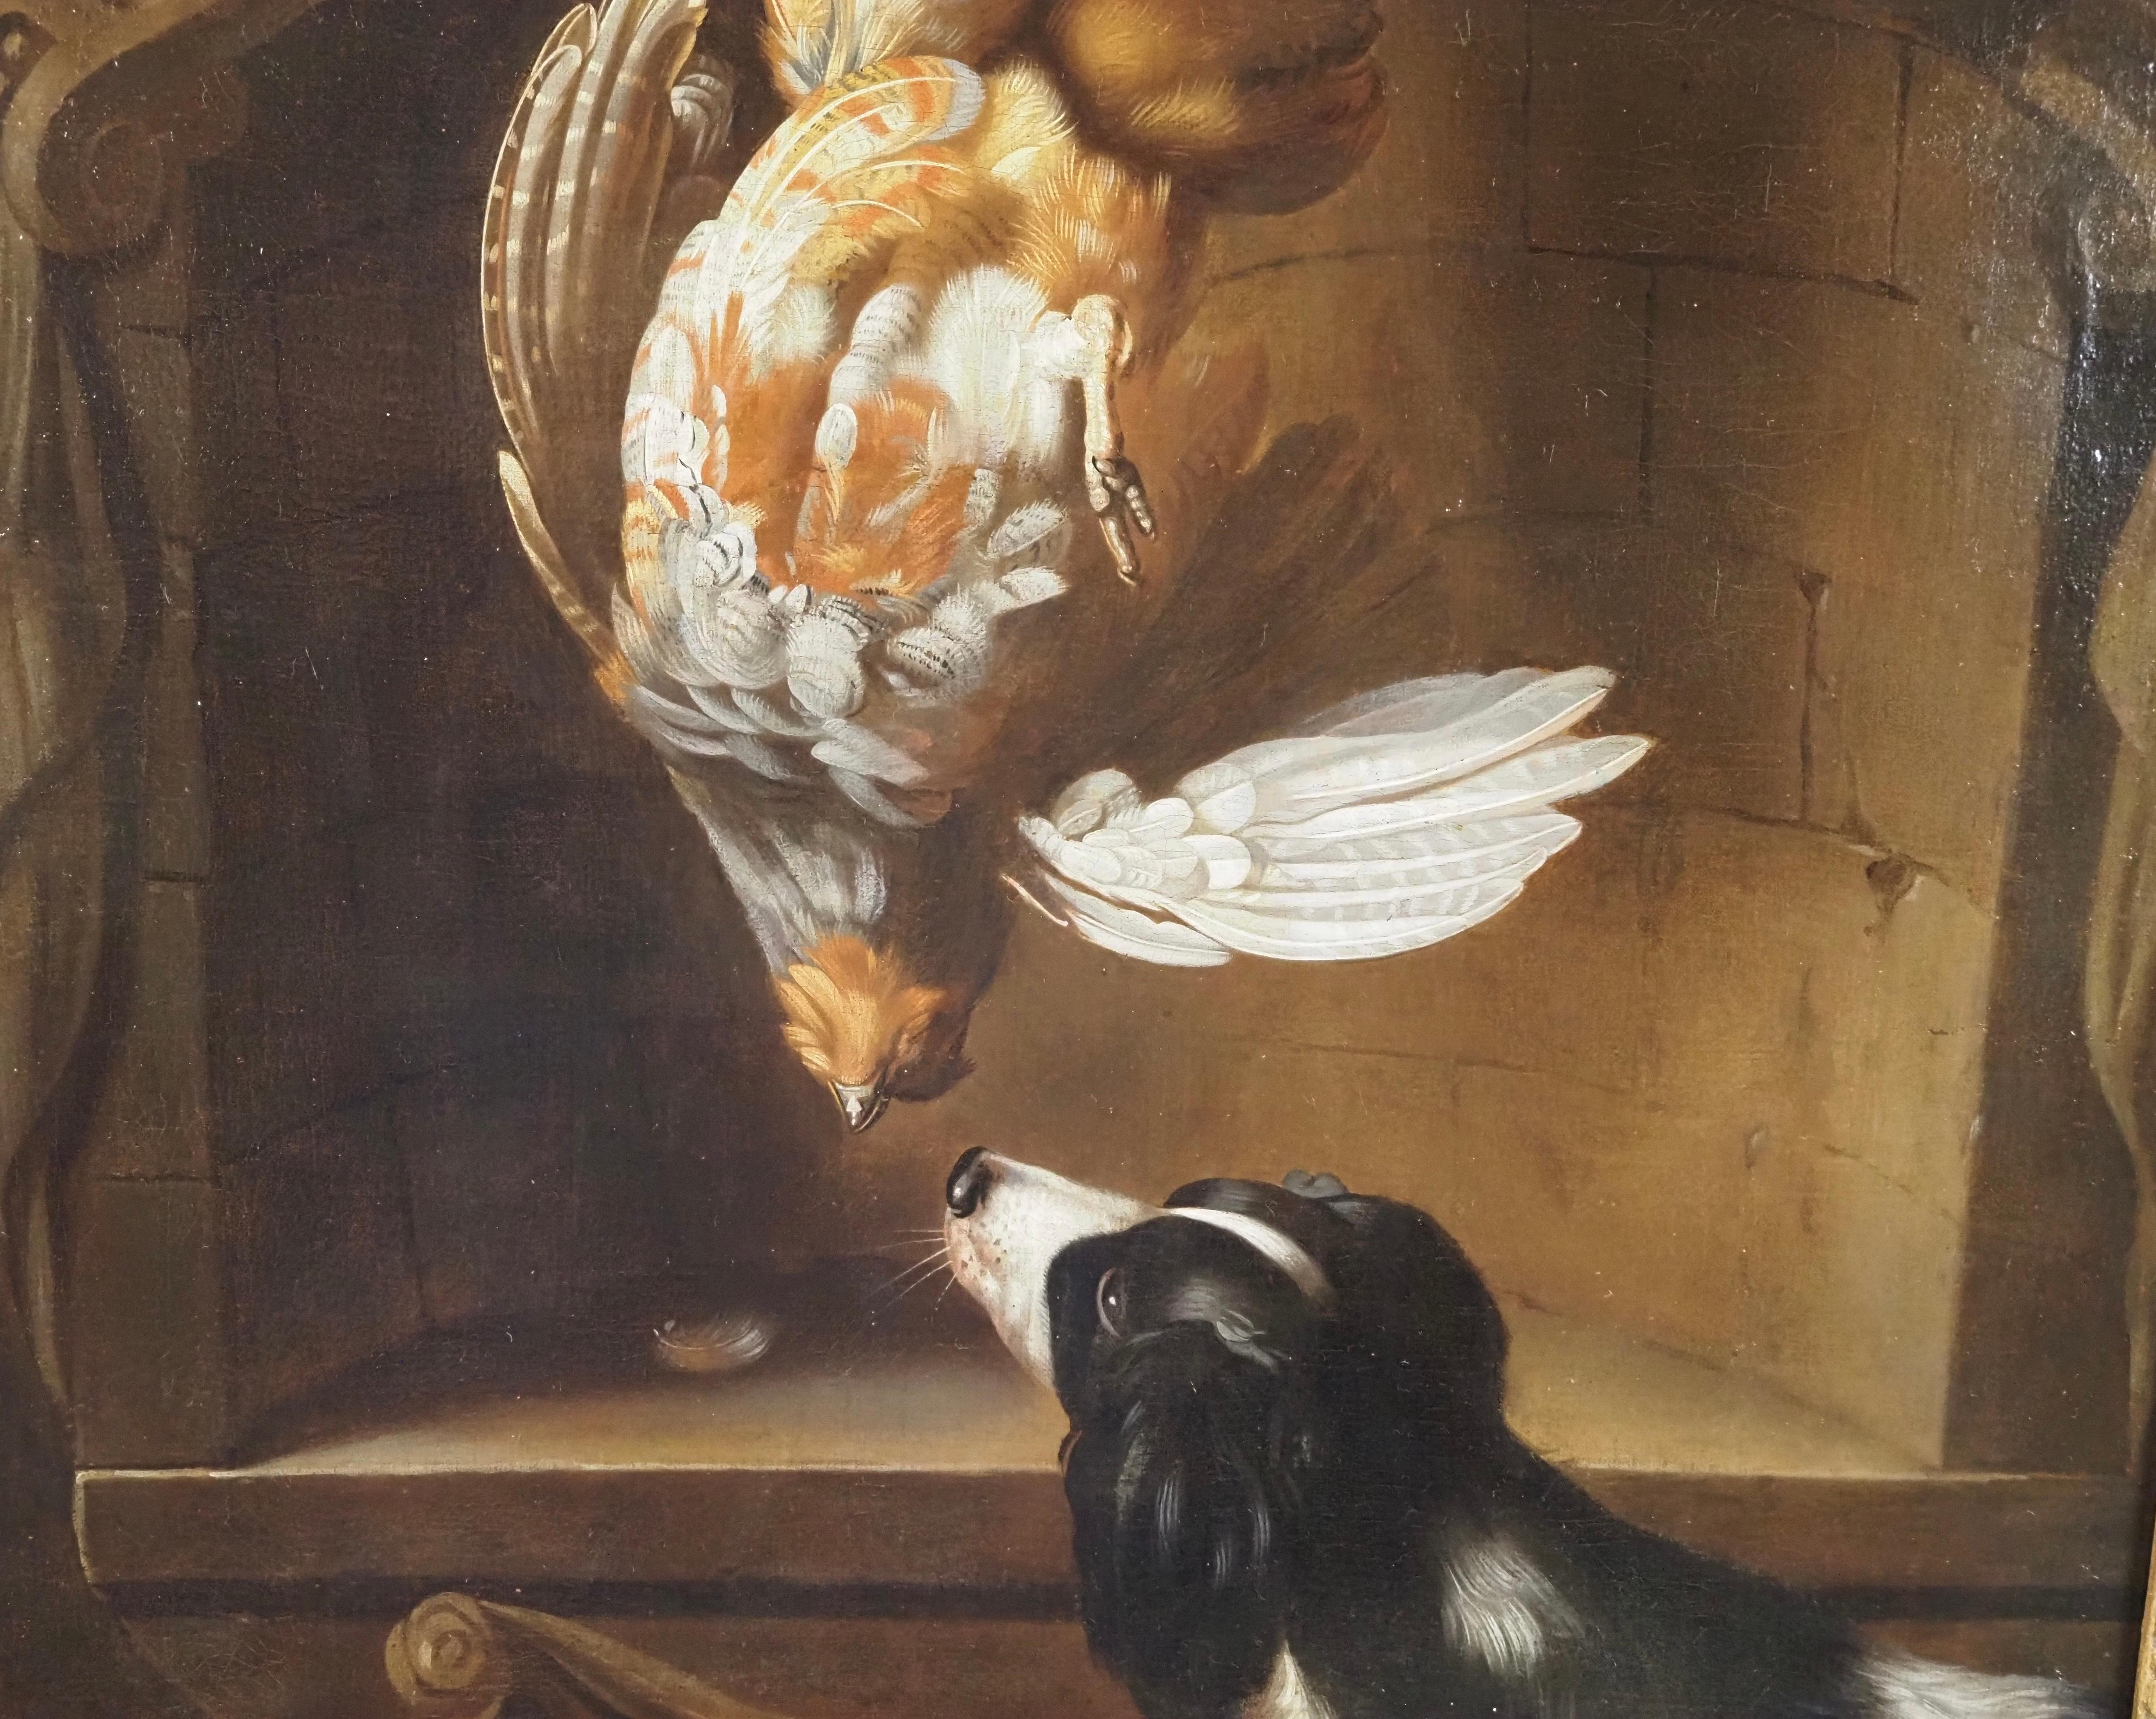 English School, 18th century
A hanging Partridge in a sculpted cartouche, a spaniel below
Oil on canvas
Canvas size - 30 x 25 in
Framed size - 36 x 31 in